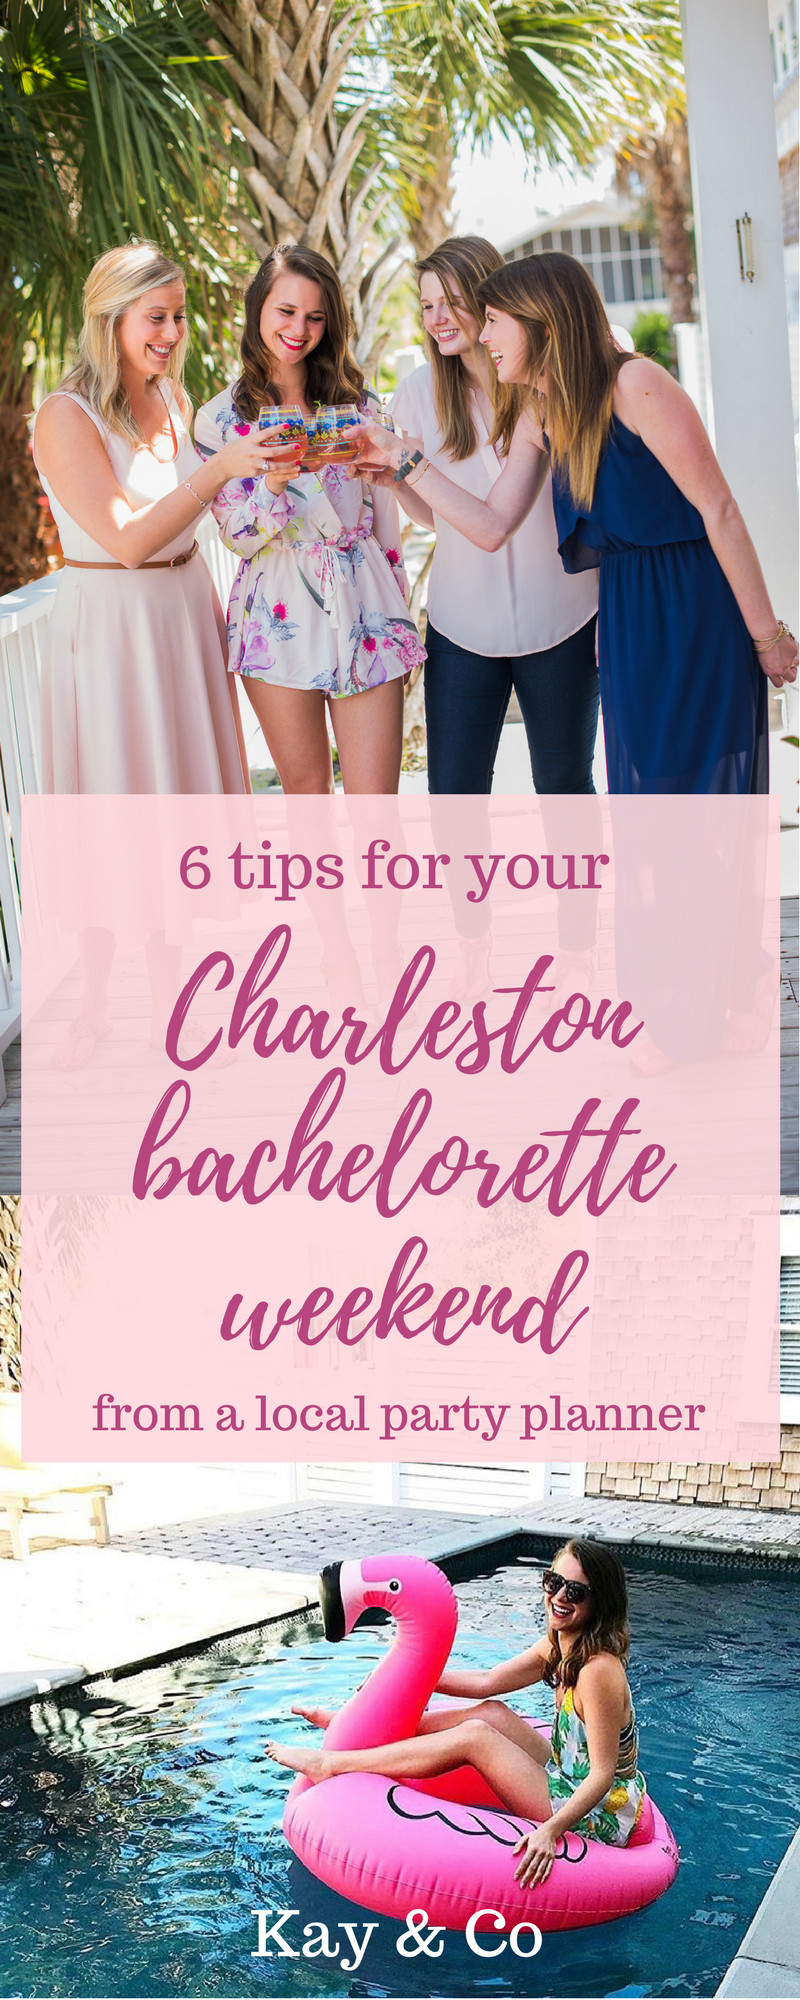 Bachelorette Party Ideas In South Myrtle Beach Sc
 how to host the best ever bachelorette weekend or girls